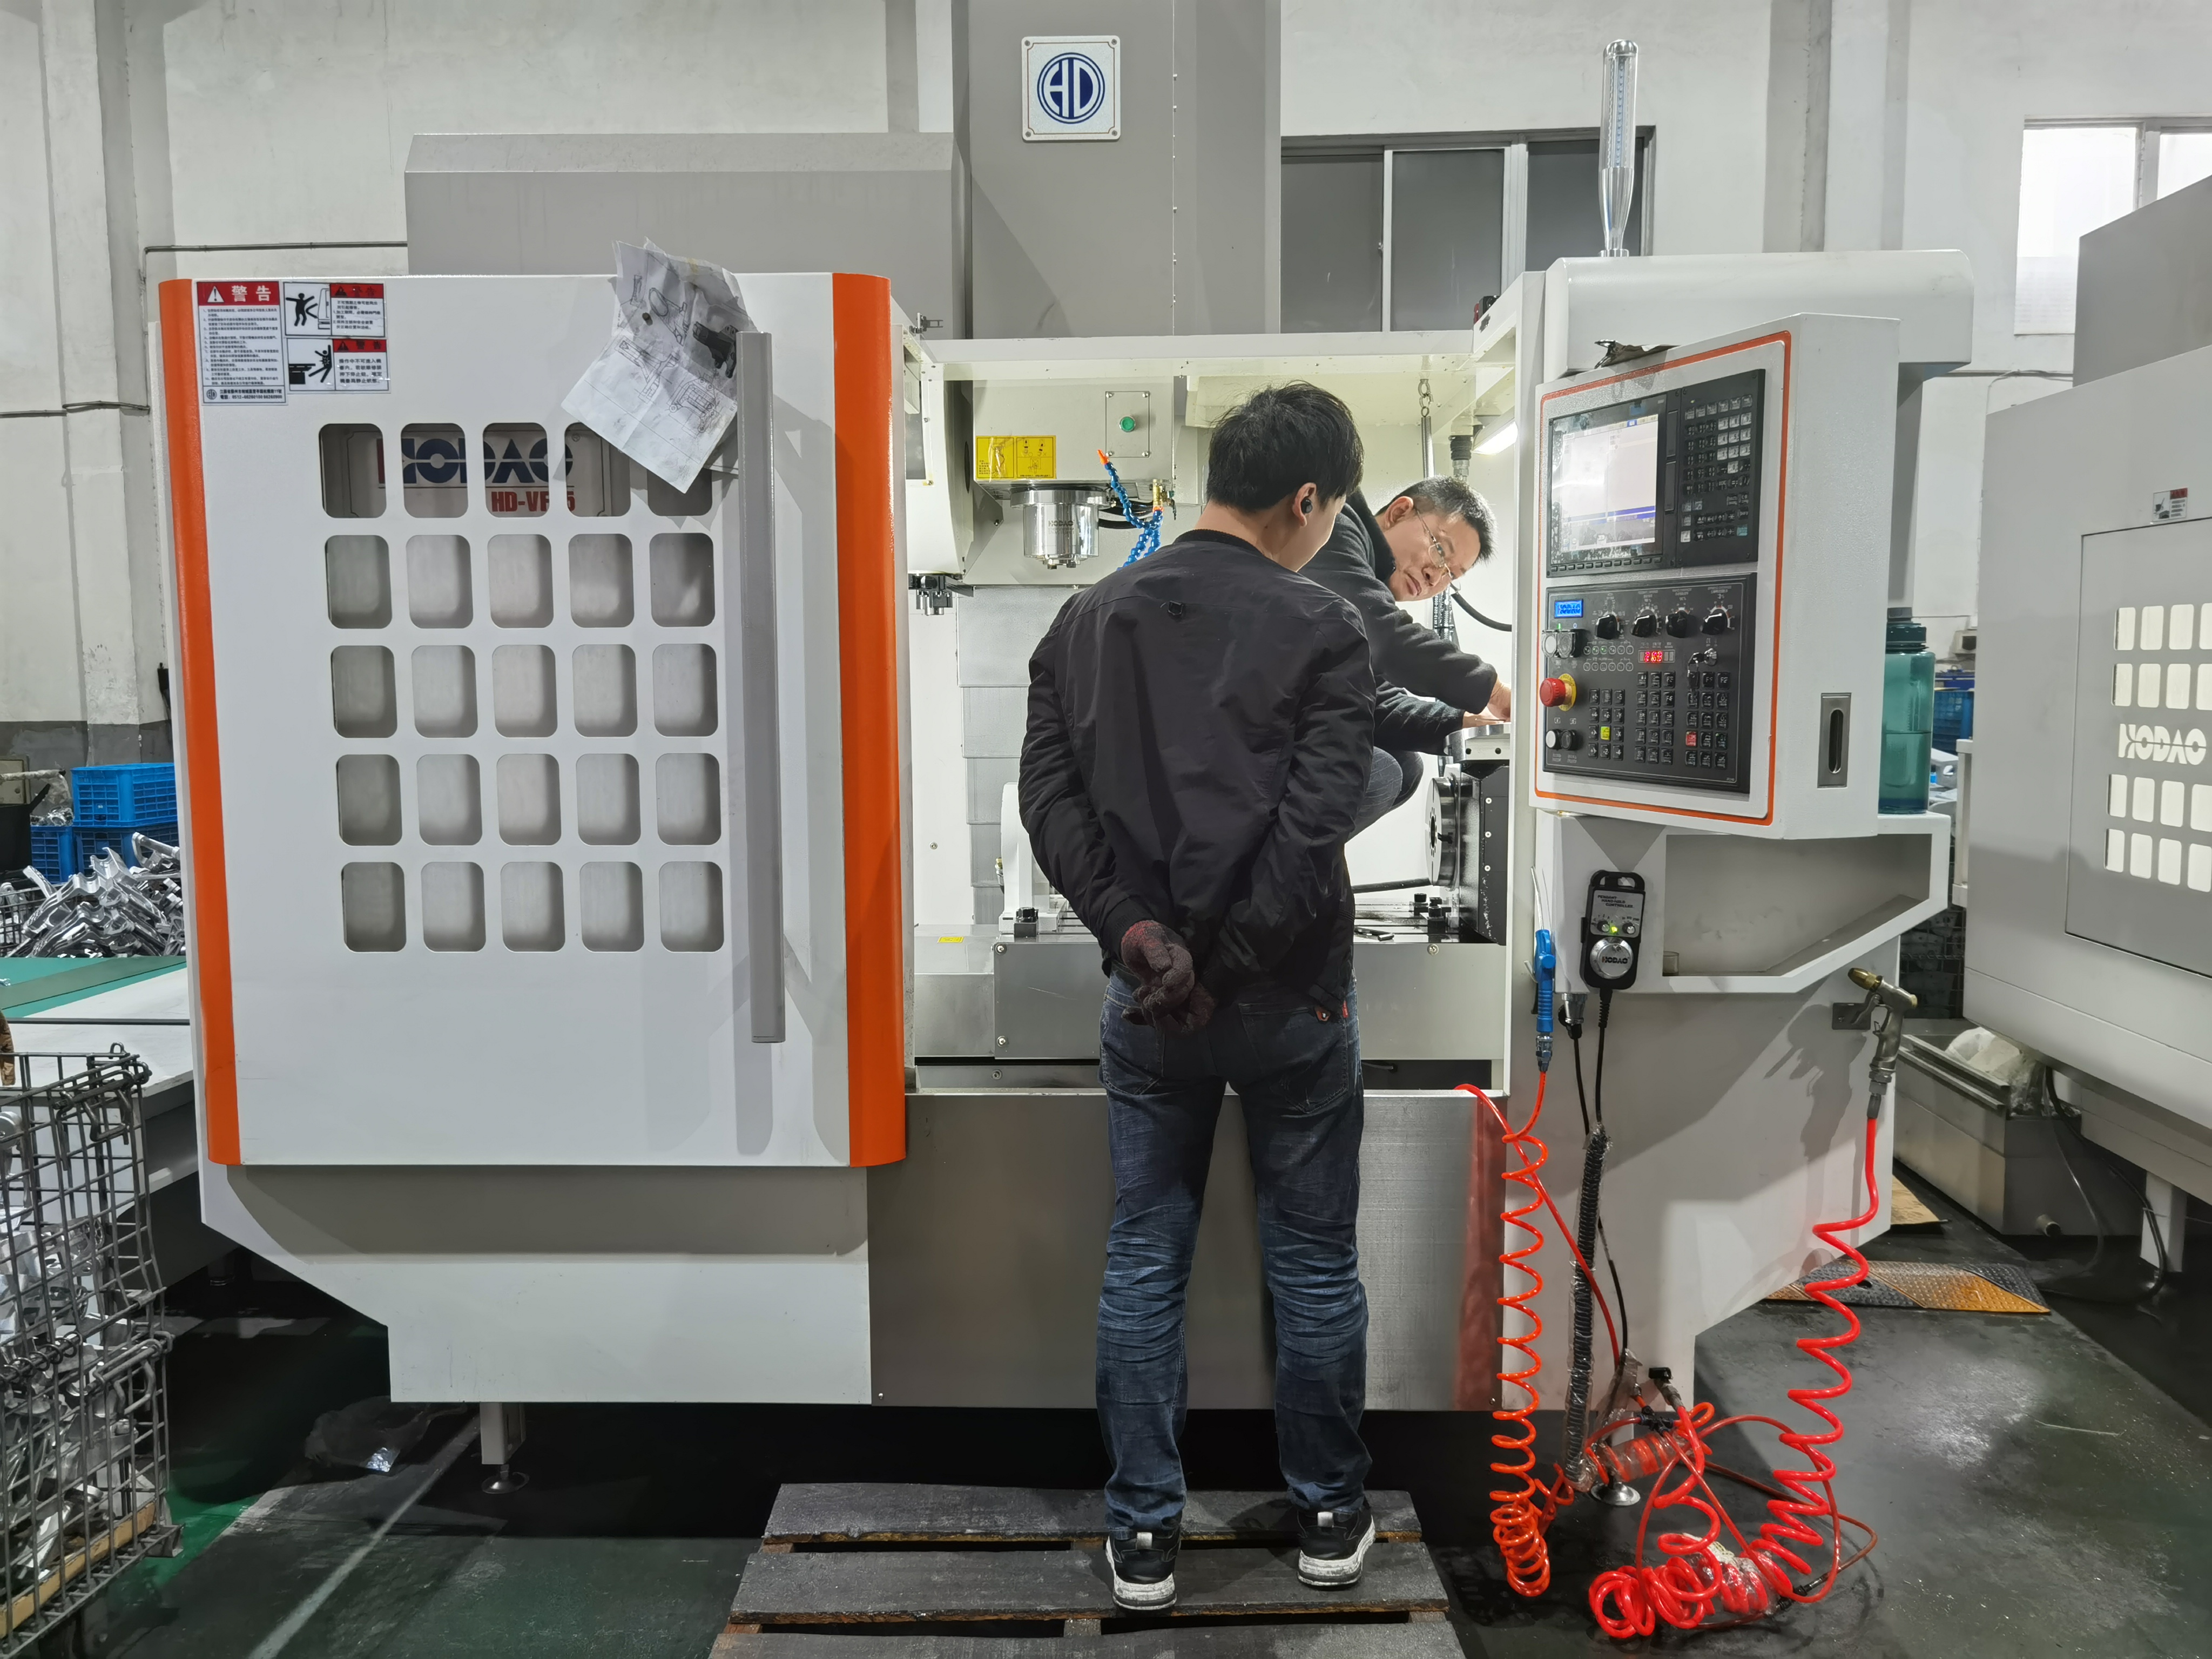 Two new machining centers have entered the commissioning stage and will be put into production soon